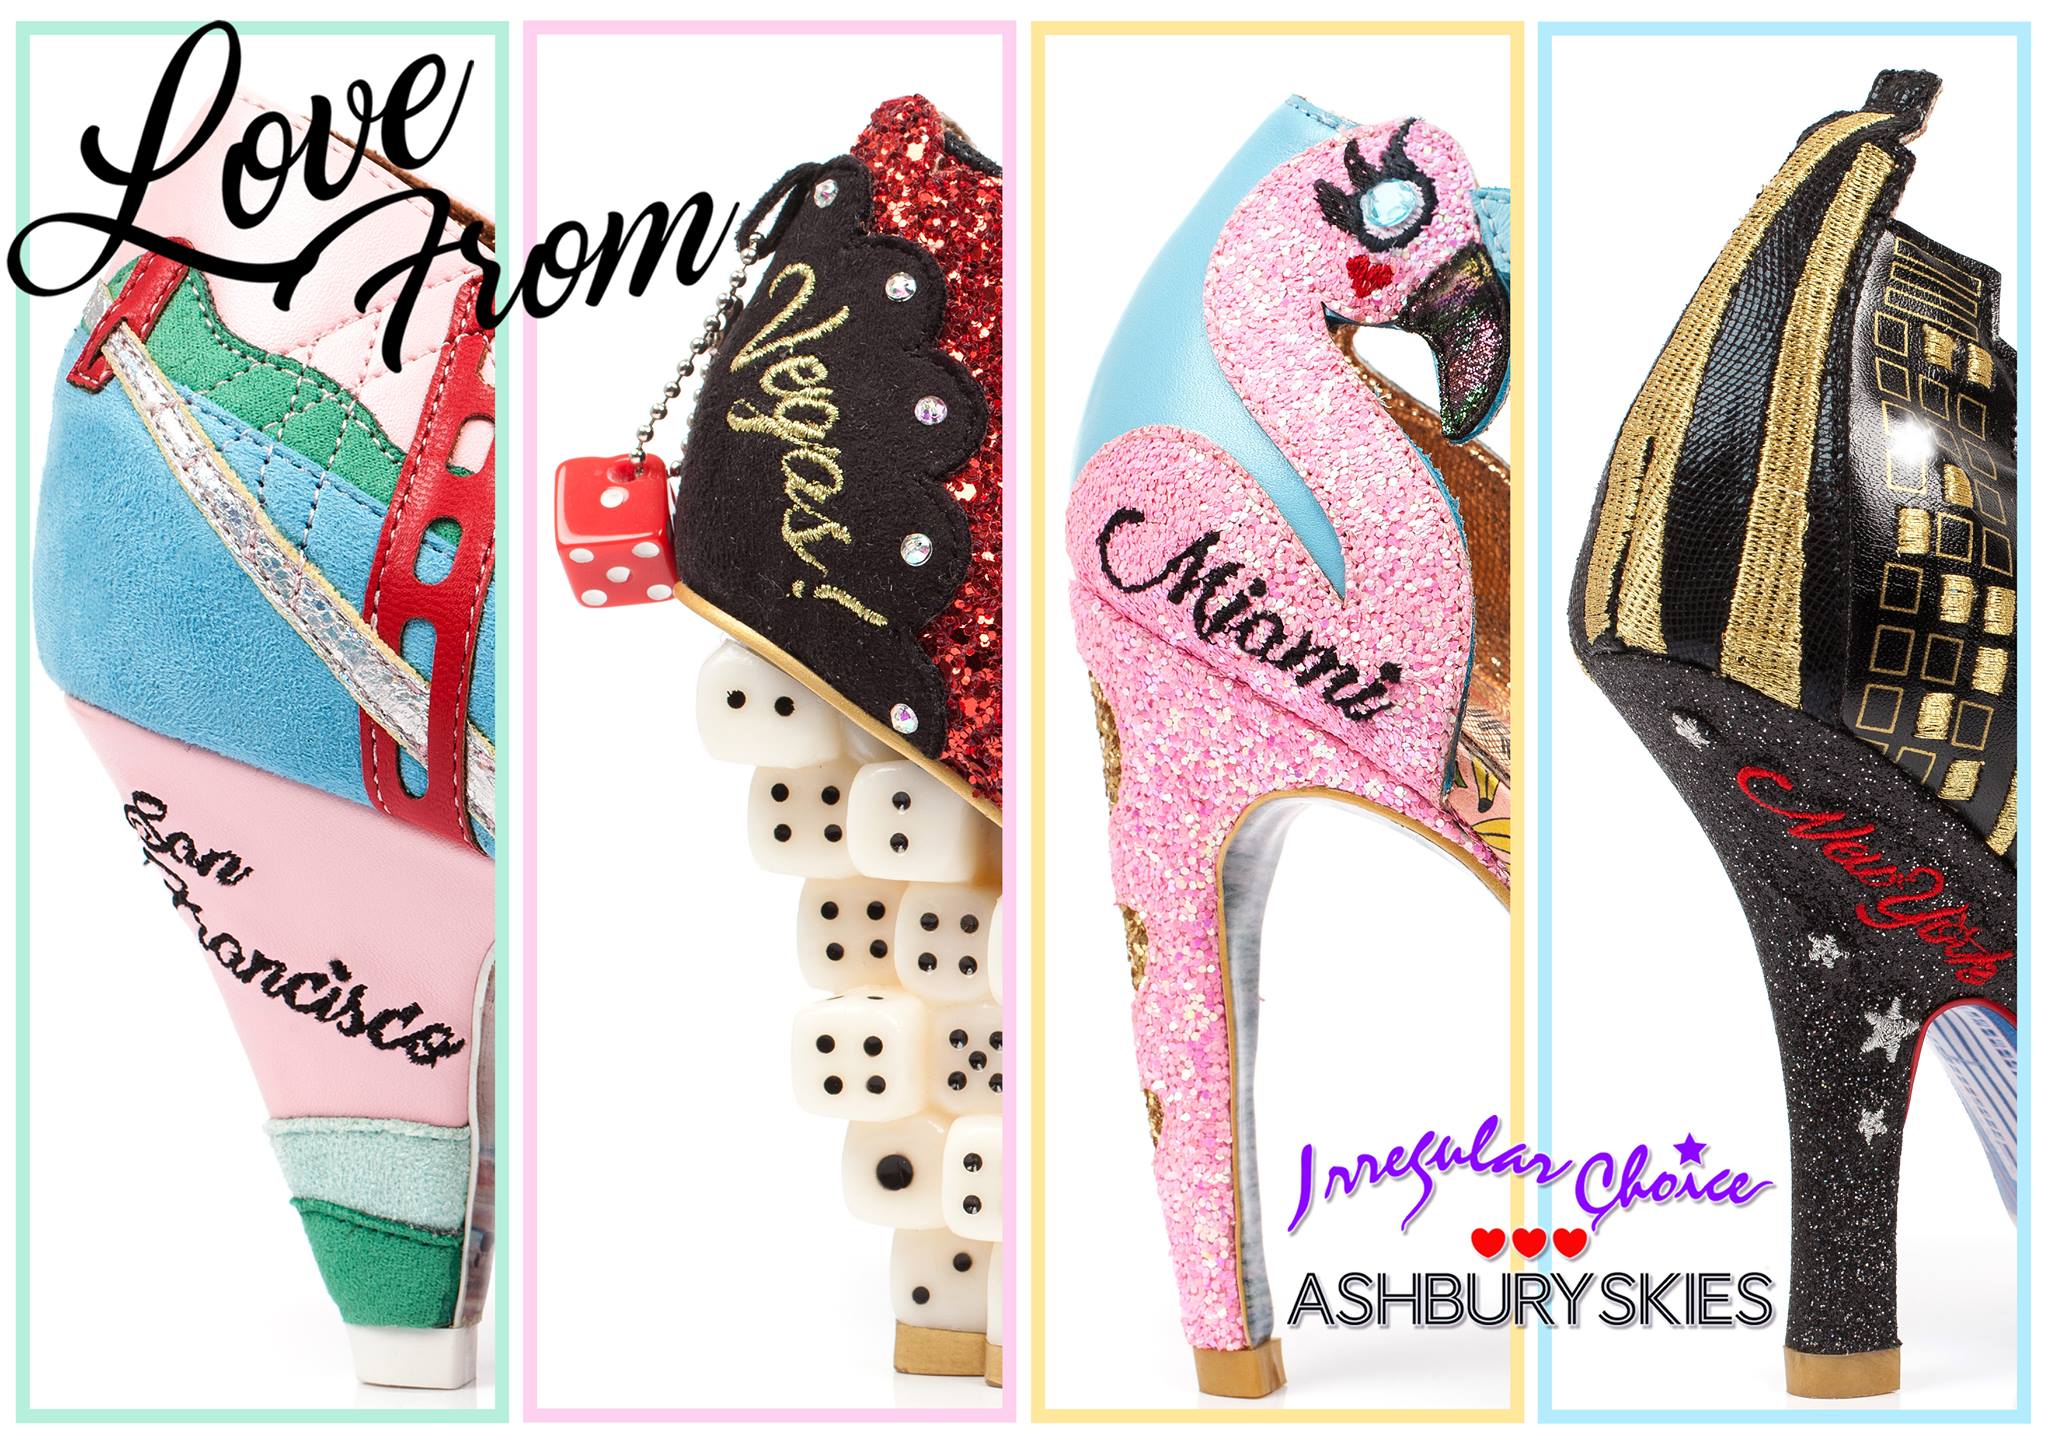 Our first collaboration collection with USA web retailer Ashbury Skies!